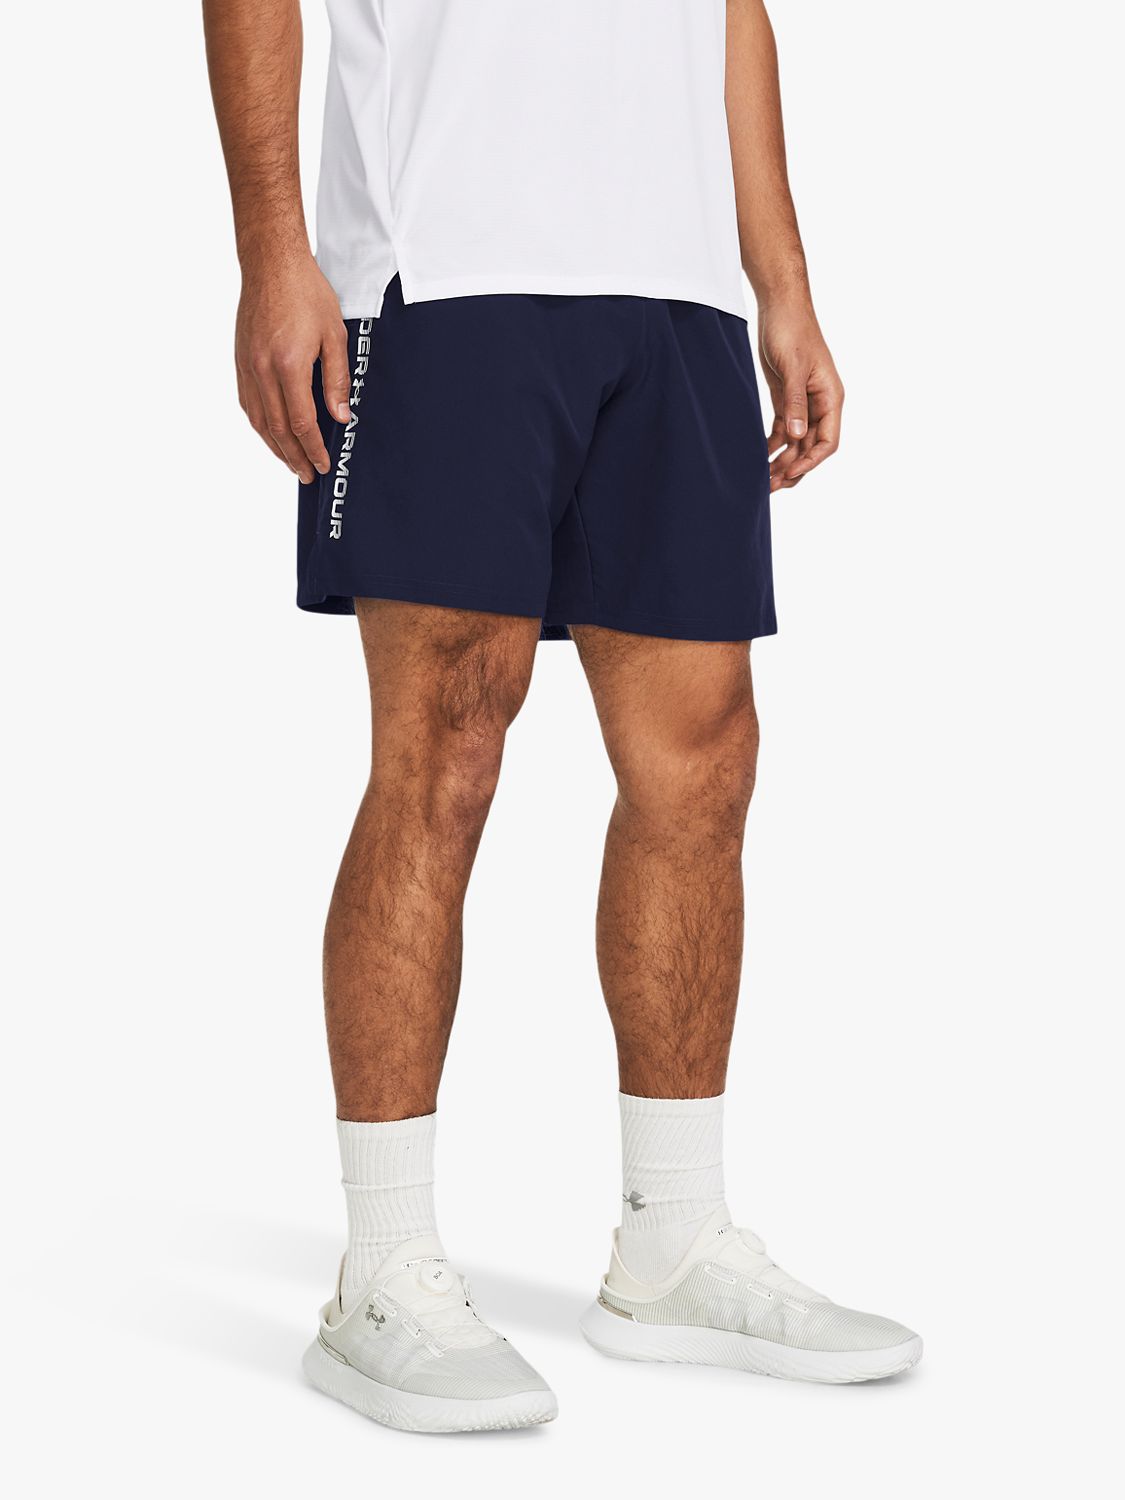 Under Armour Lightweight Woven Shorts, Navy/White, S